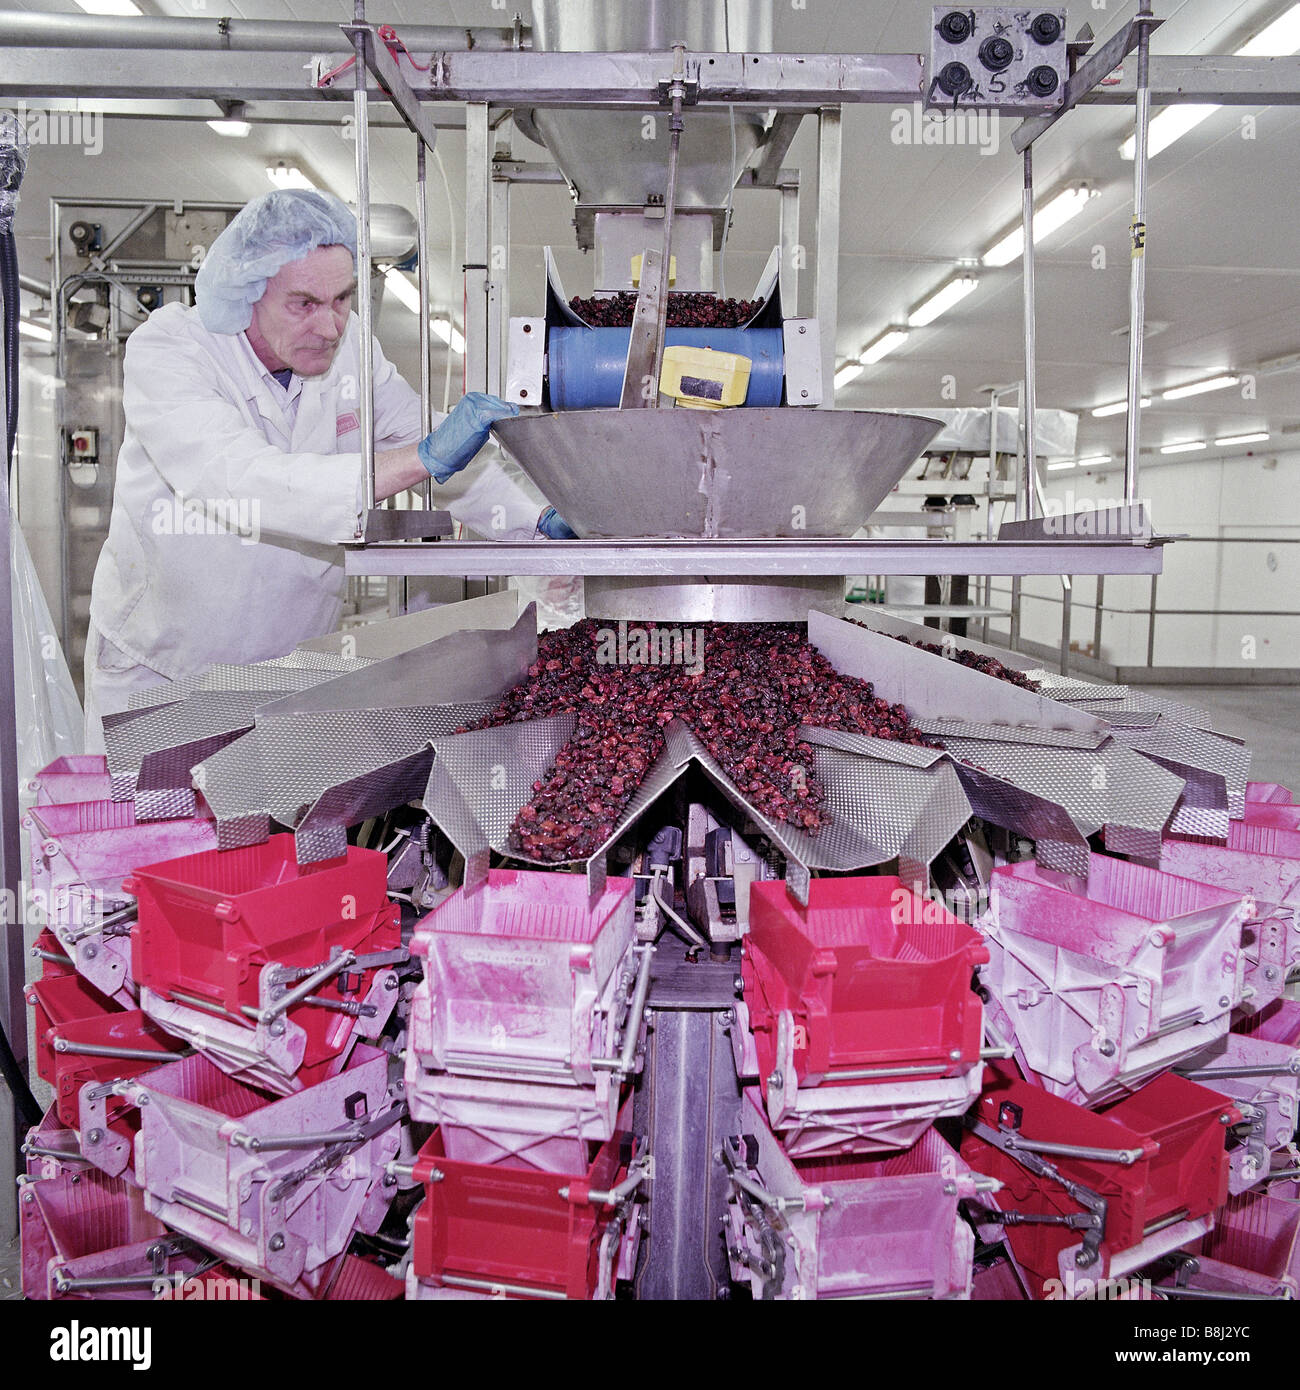 Imported fruit is passed along a production line in a factory to be packaged for retail distribution. Stock Photo